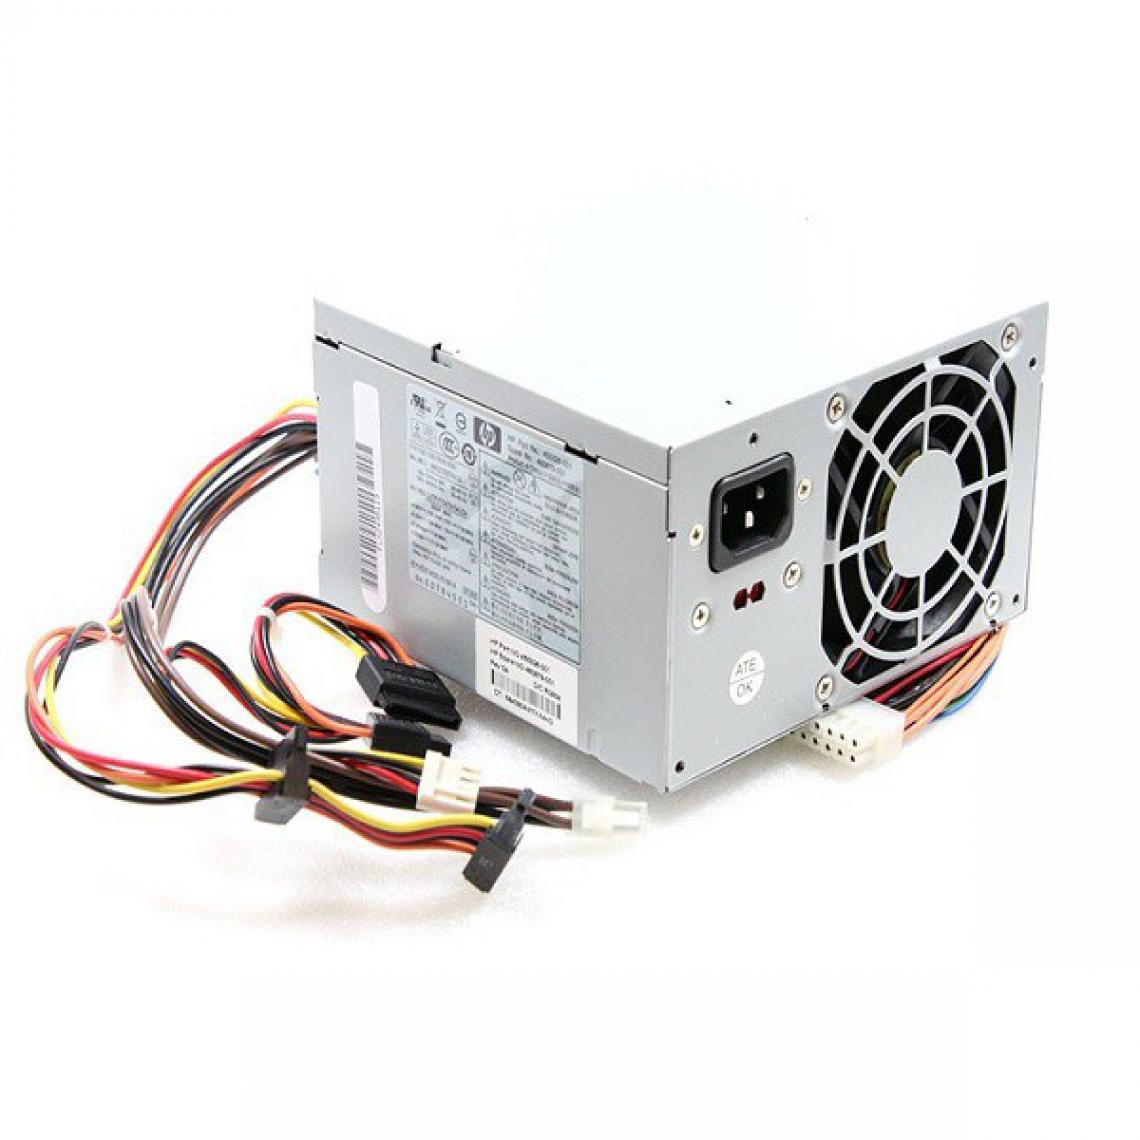 Hp - Alimentation Power Supply HP PS-6301-9 HP PN 404471-001 Hp DC5750 - Alimentation modulaire